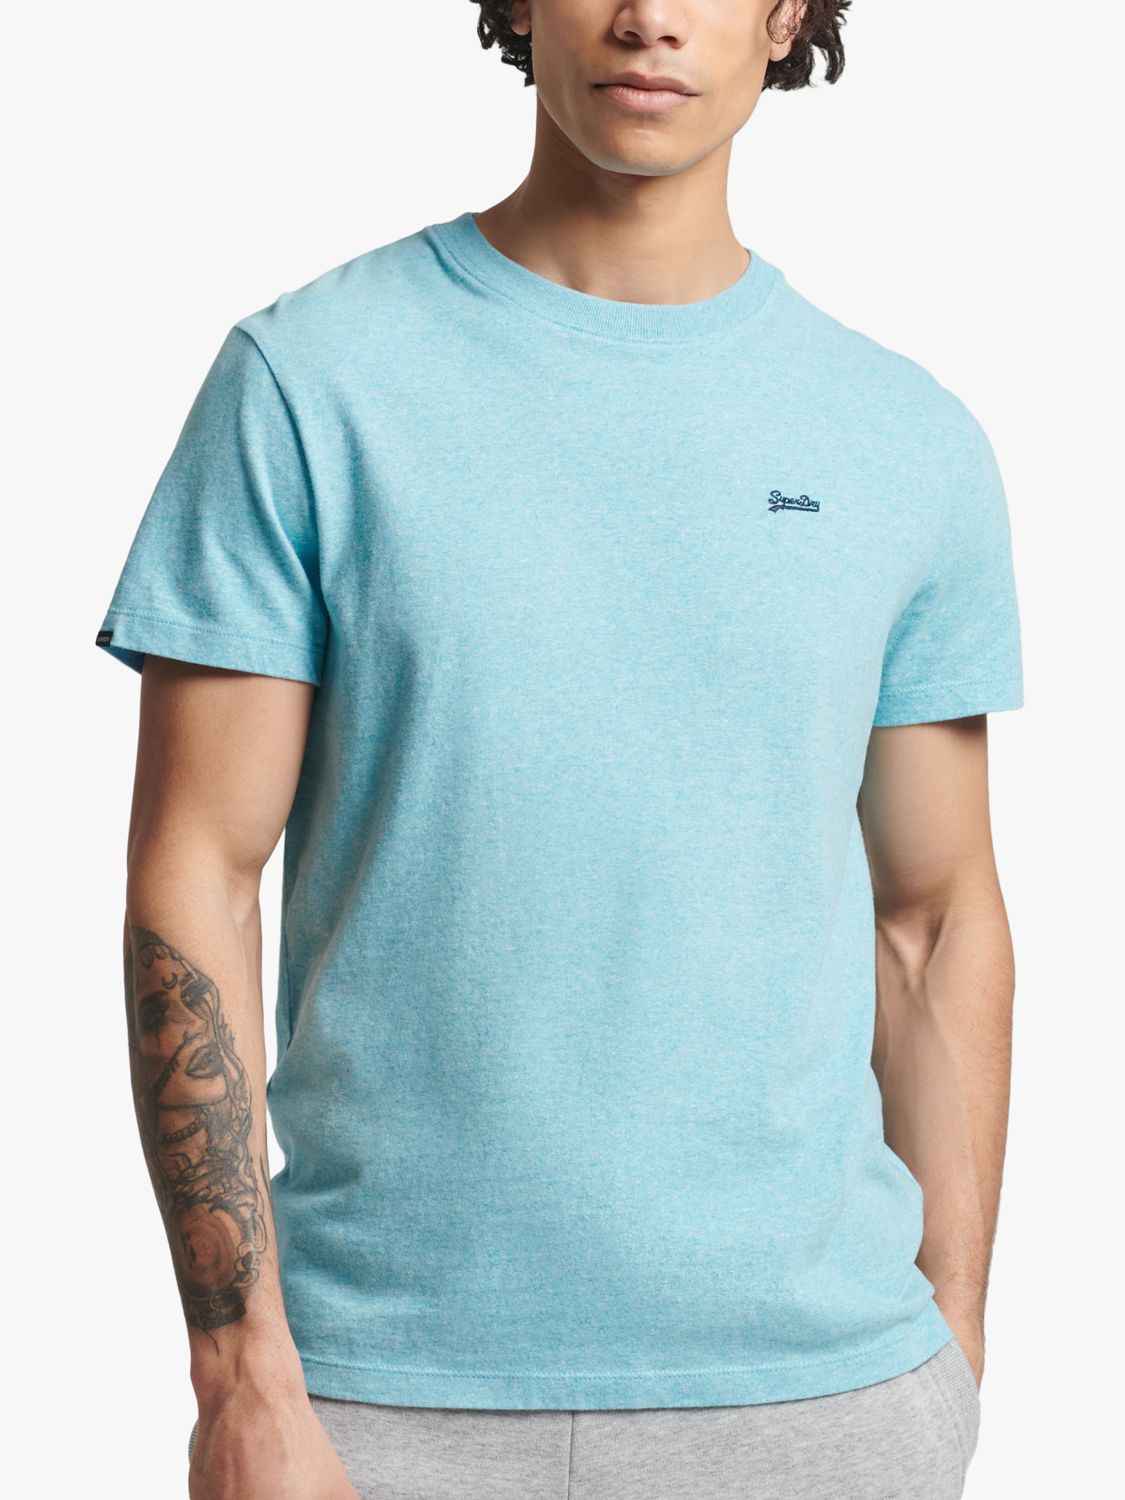 Superdry Micro Embroidered Creek T-Shirt, Turquoise Sea Grit, XS